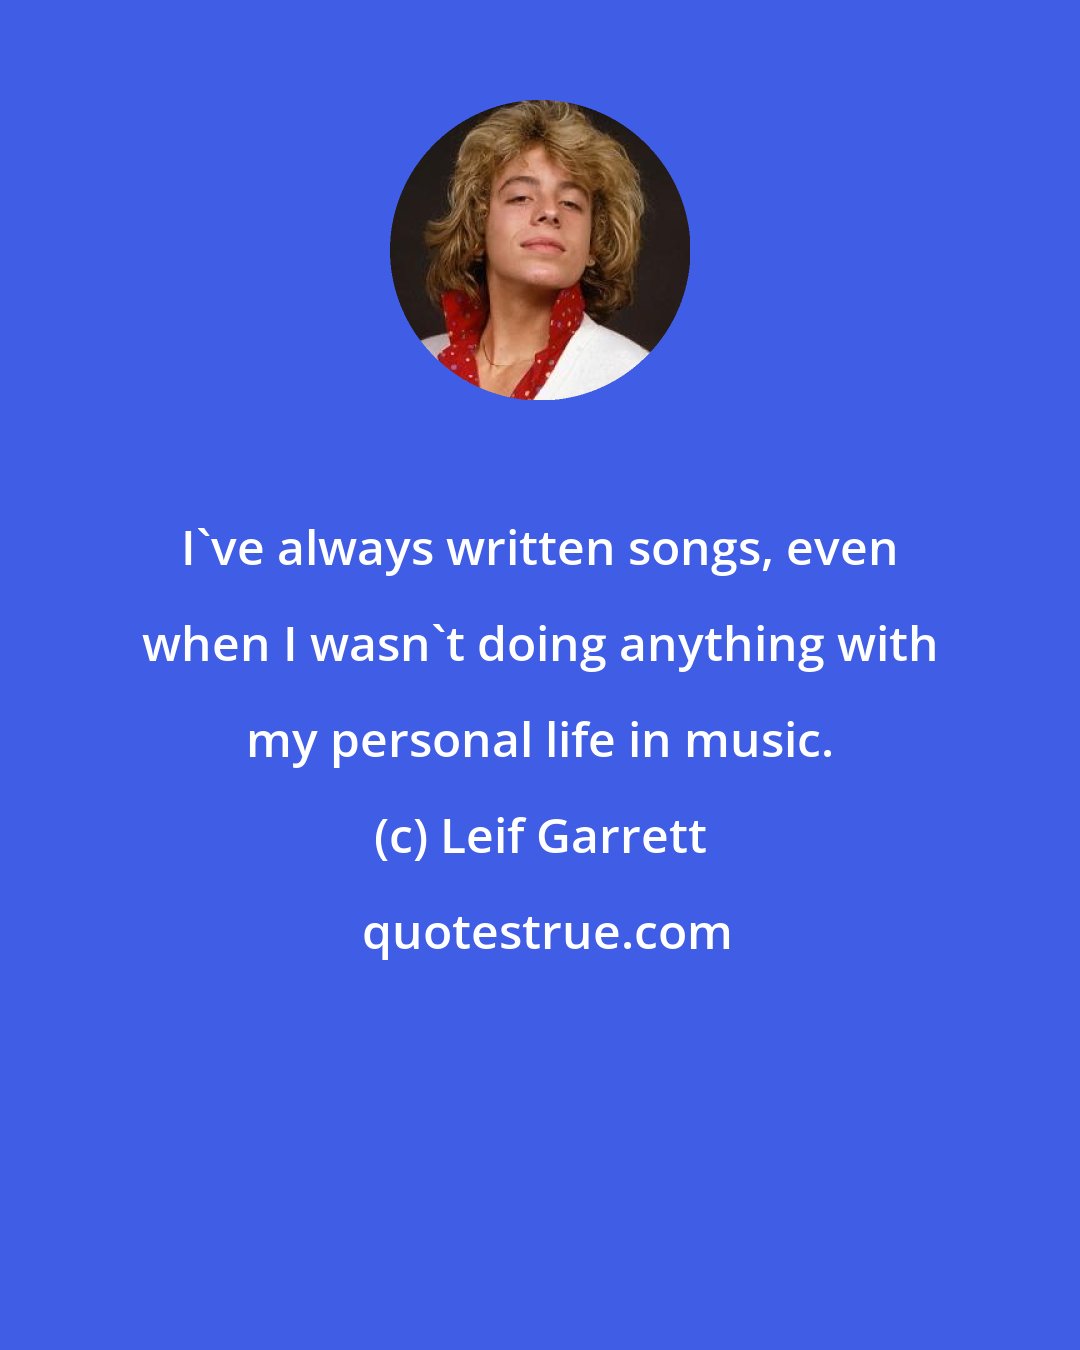 Leif Garrett: I've always written songs, even when I wasn't doing anything with my personal life in music.